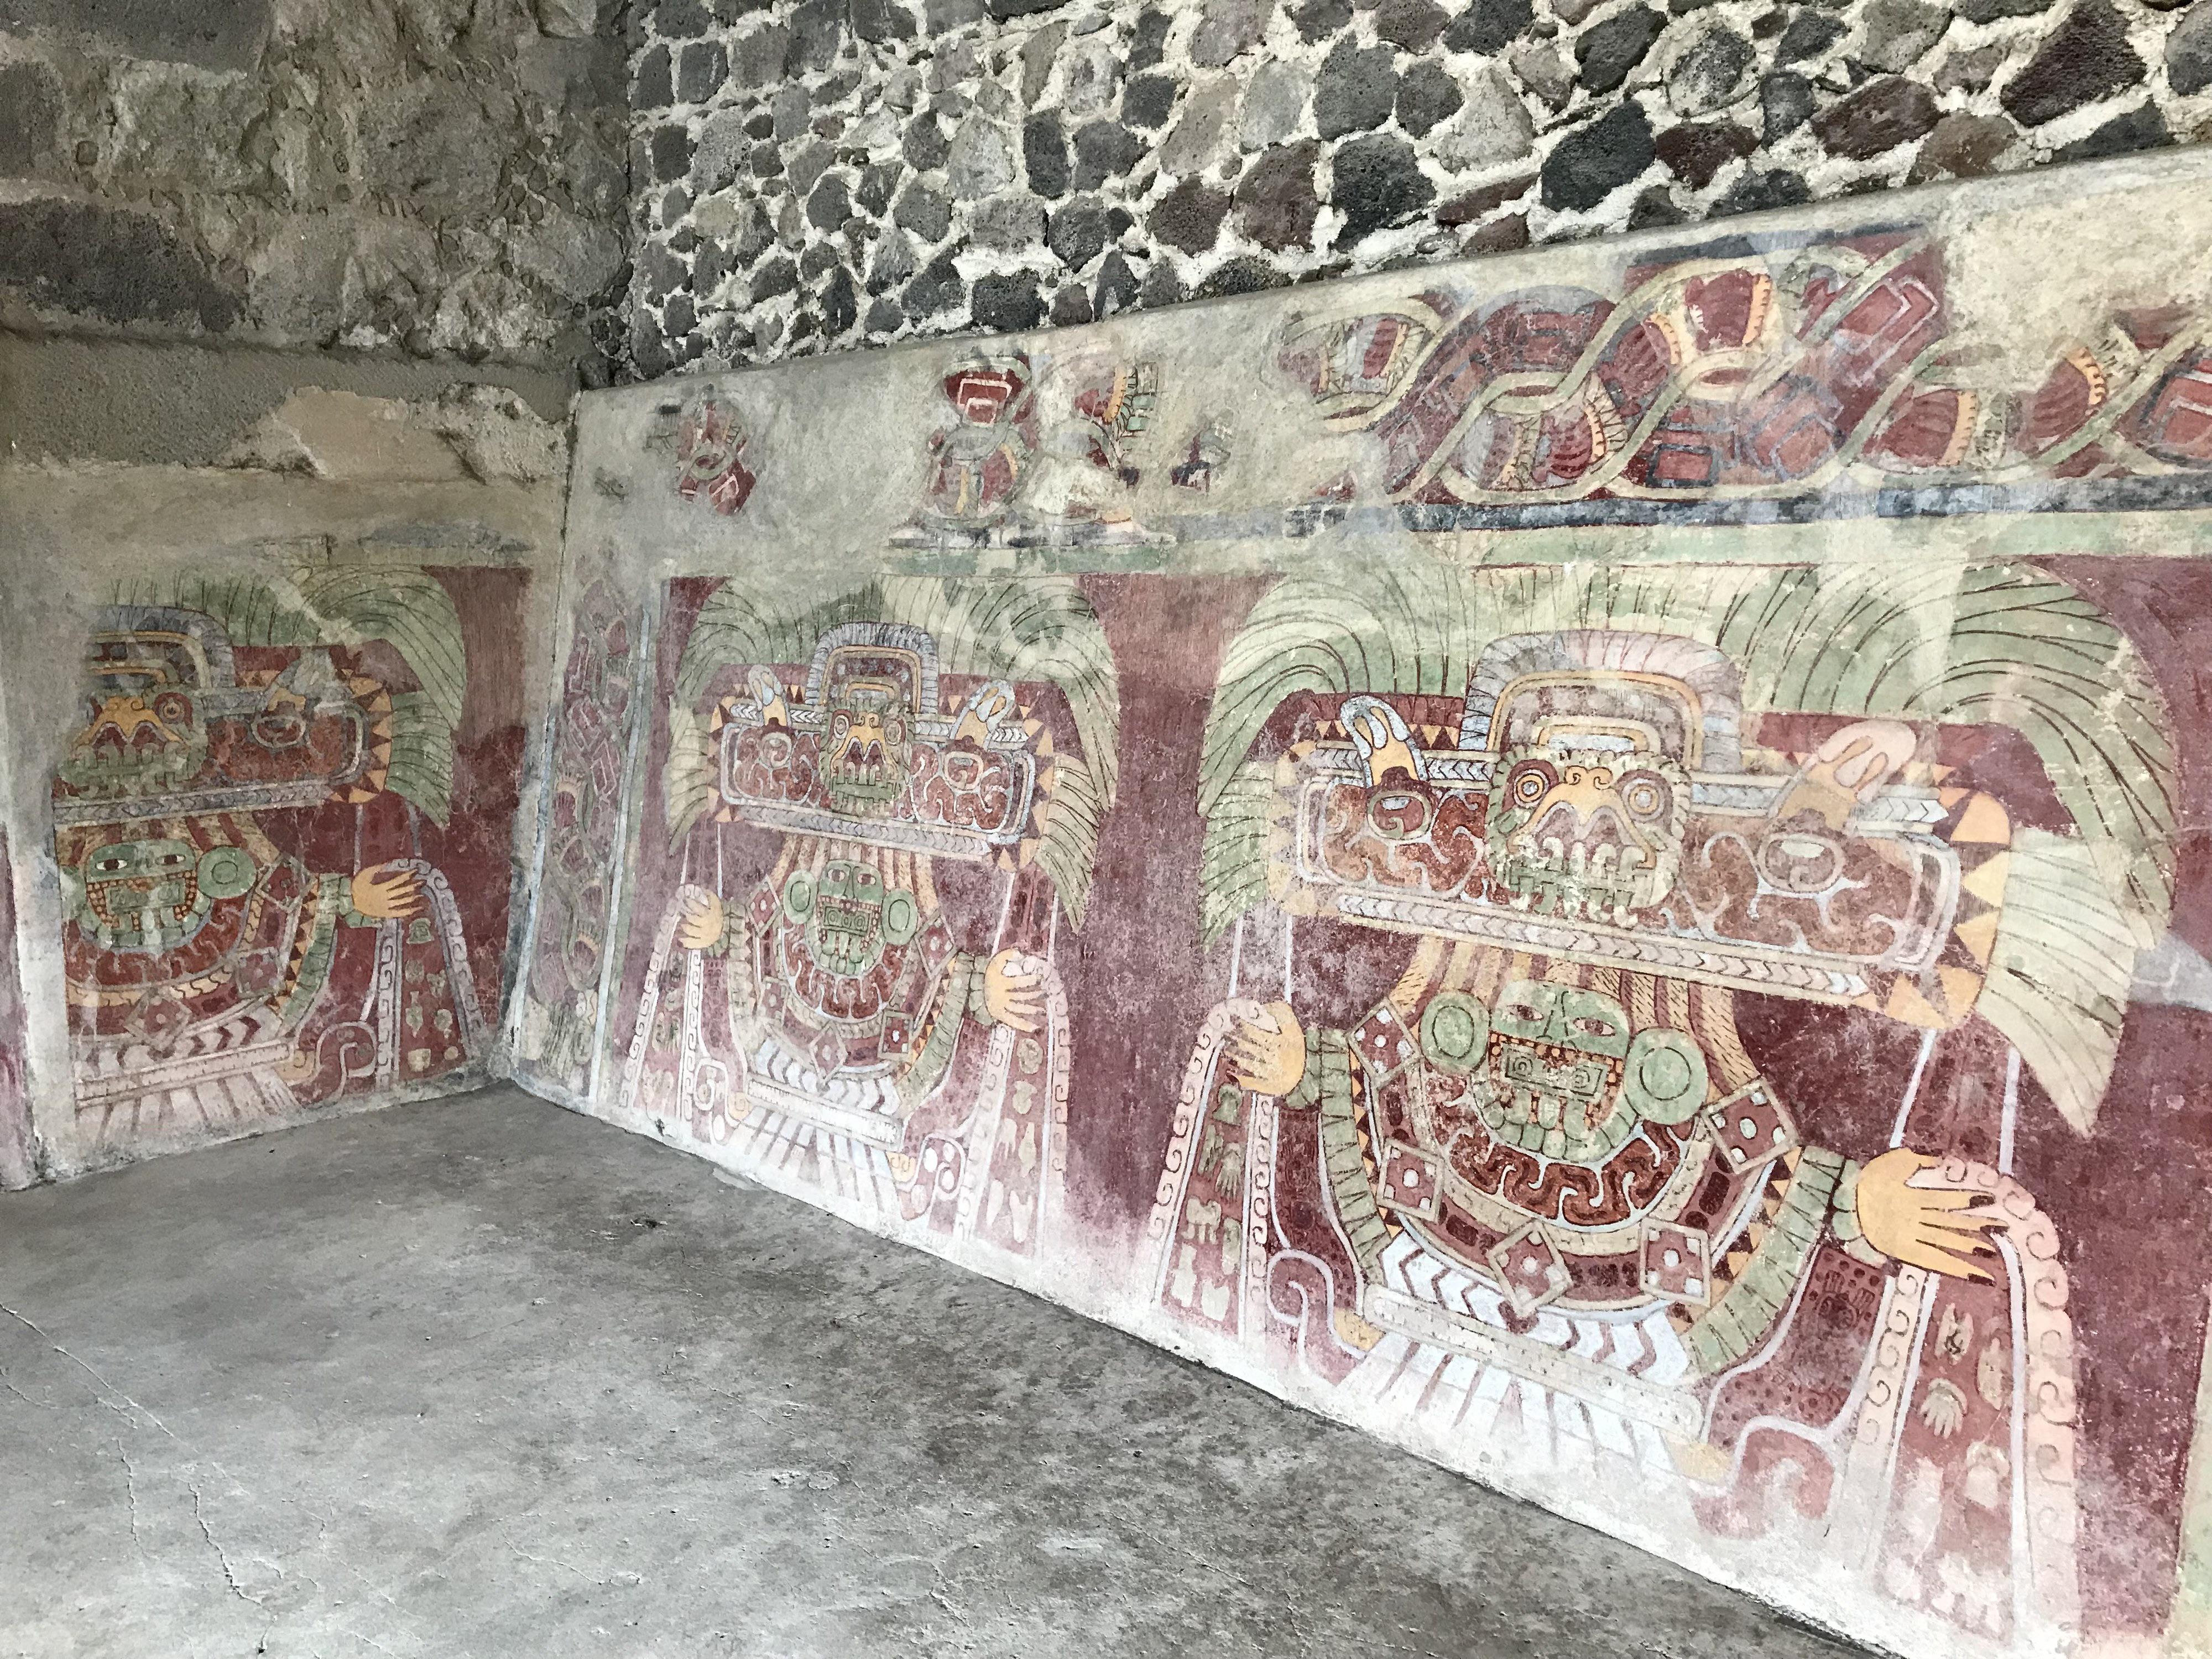 Mural from the Tetitla palace compound in Teotihuacan, Mexico depicting the Great Goddess of Teotihuacan. 1-550 CE.jpg